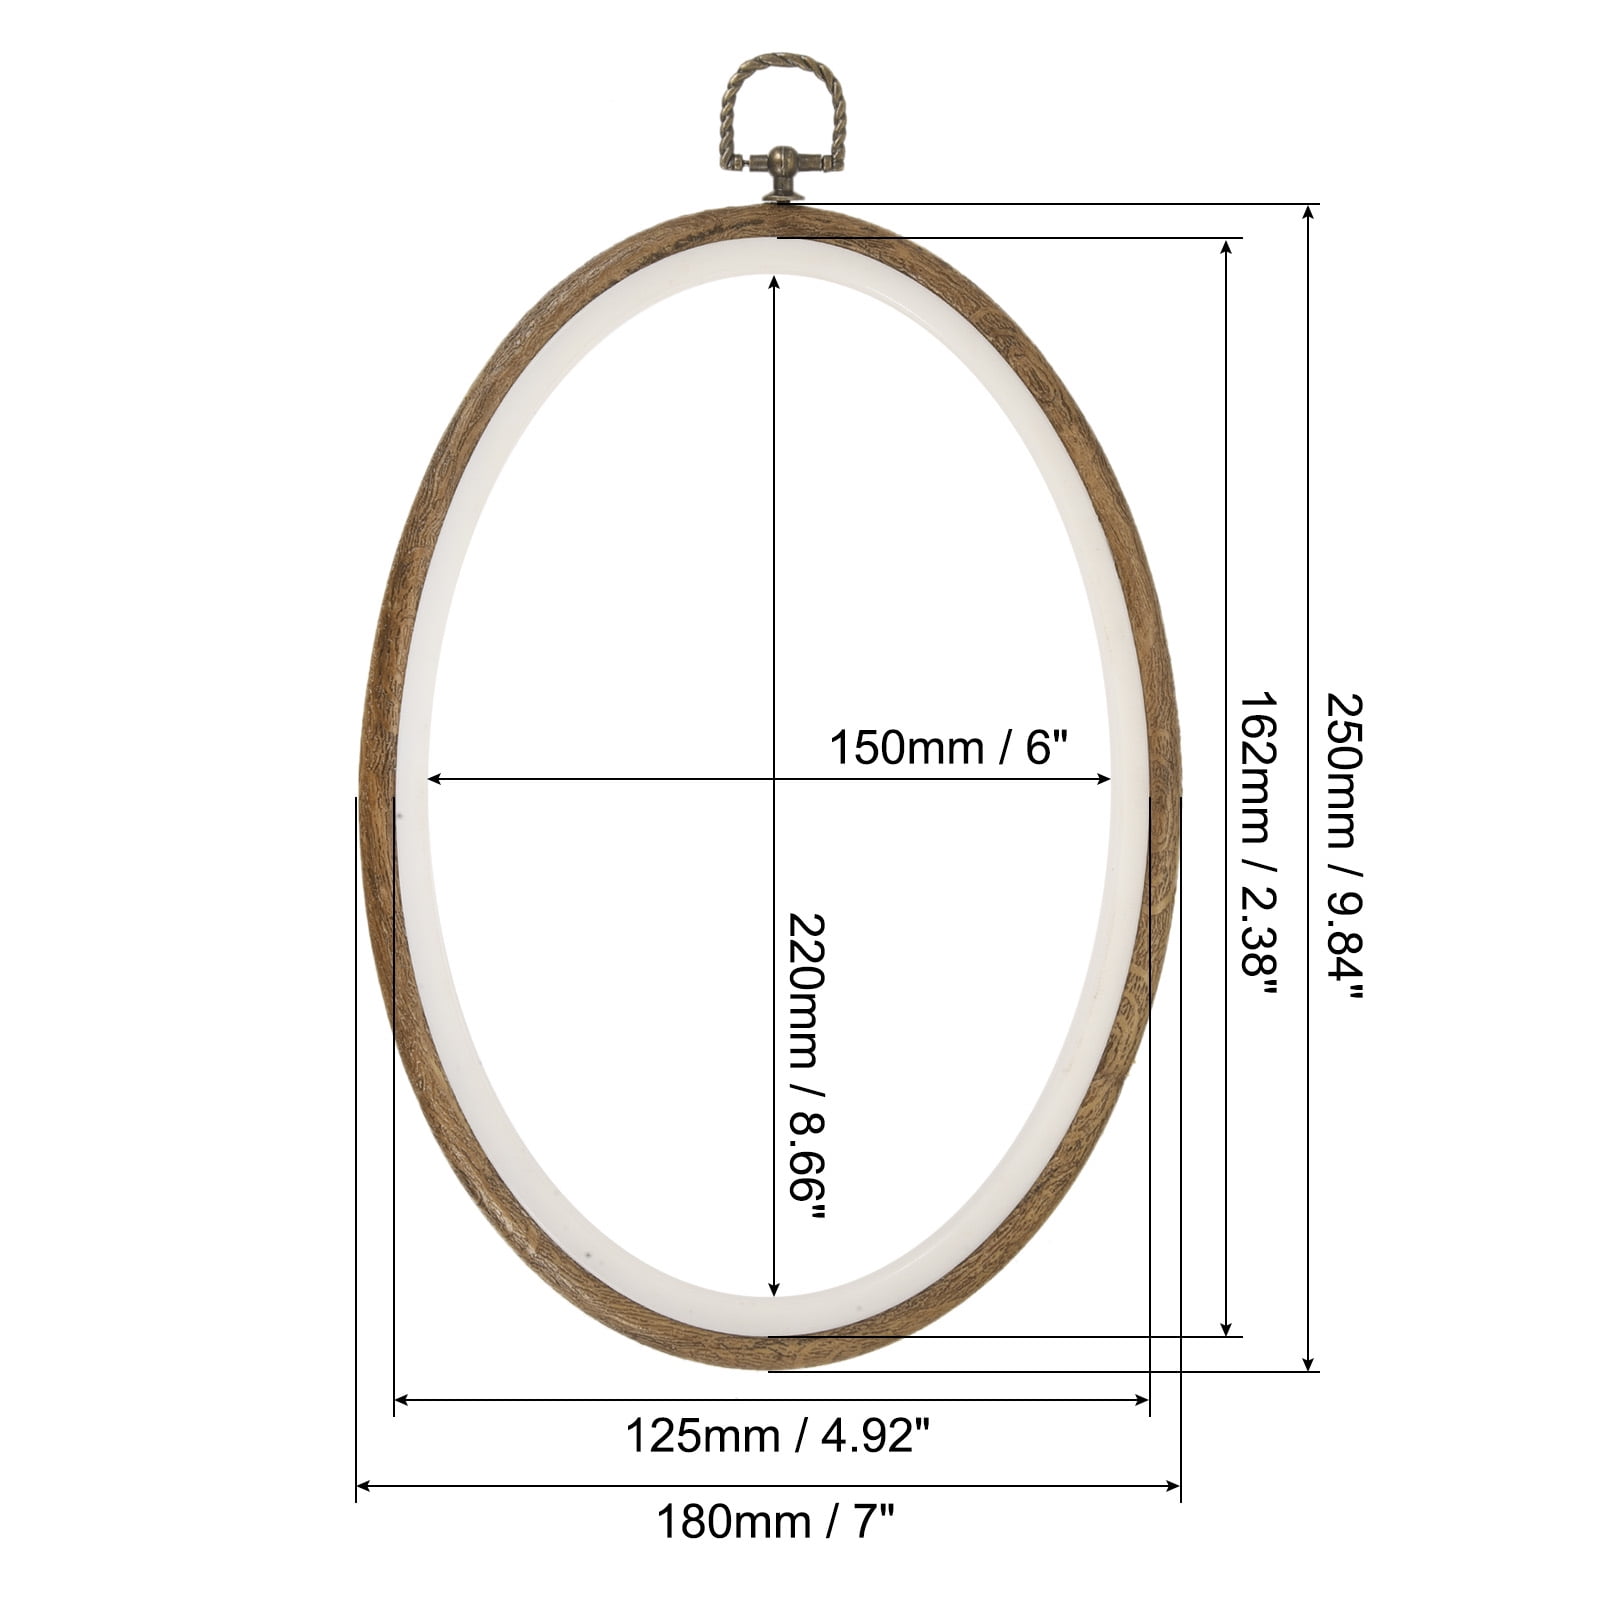 Uxcell Rubber Oval Embroidery Hoop Frame Cross-Stitch Art Craft Ring, 3in1  Set